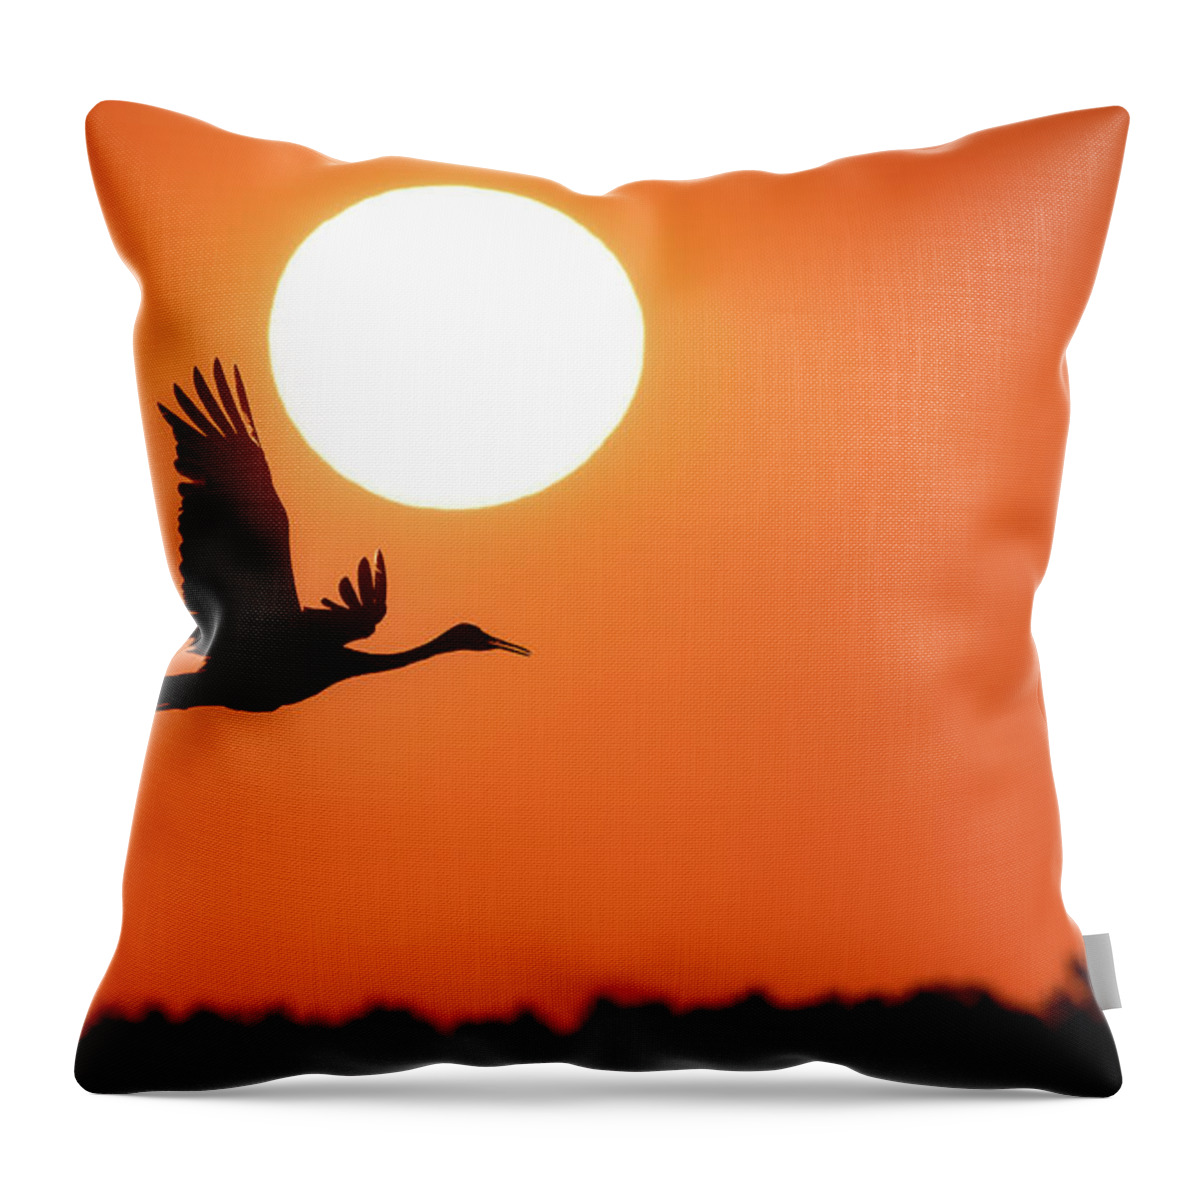 Crane Throw Pillow featuring the photograph New Day #1 by Brad Bellisle